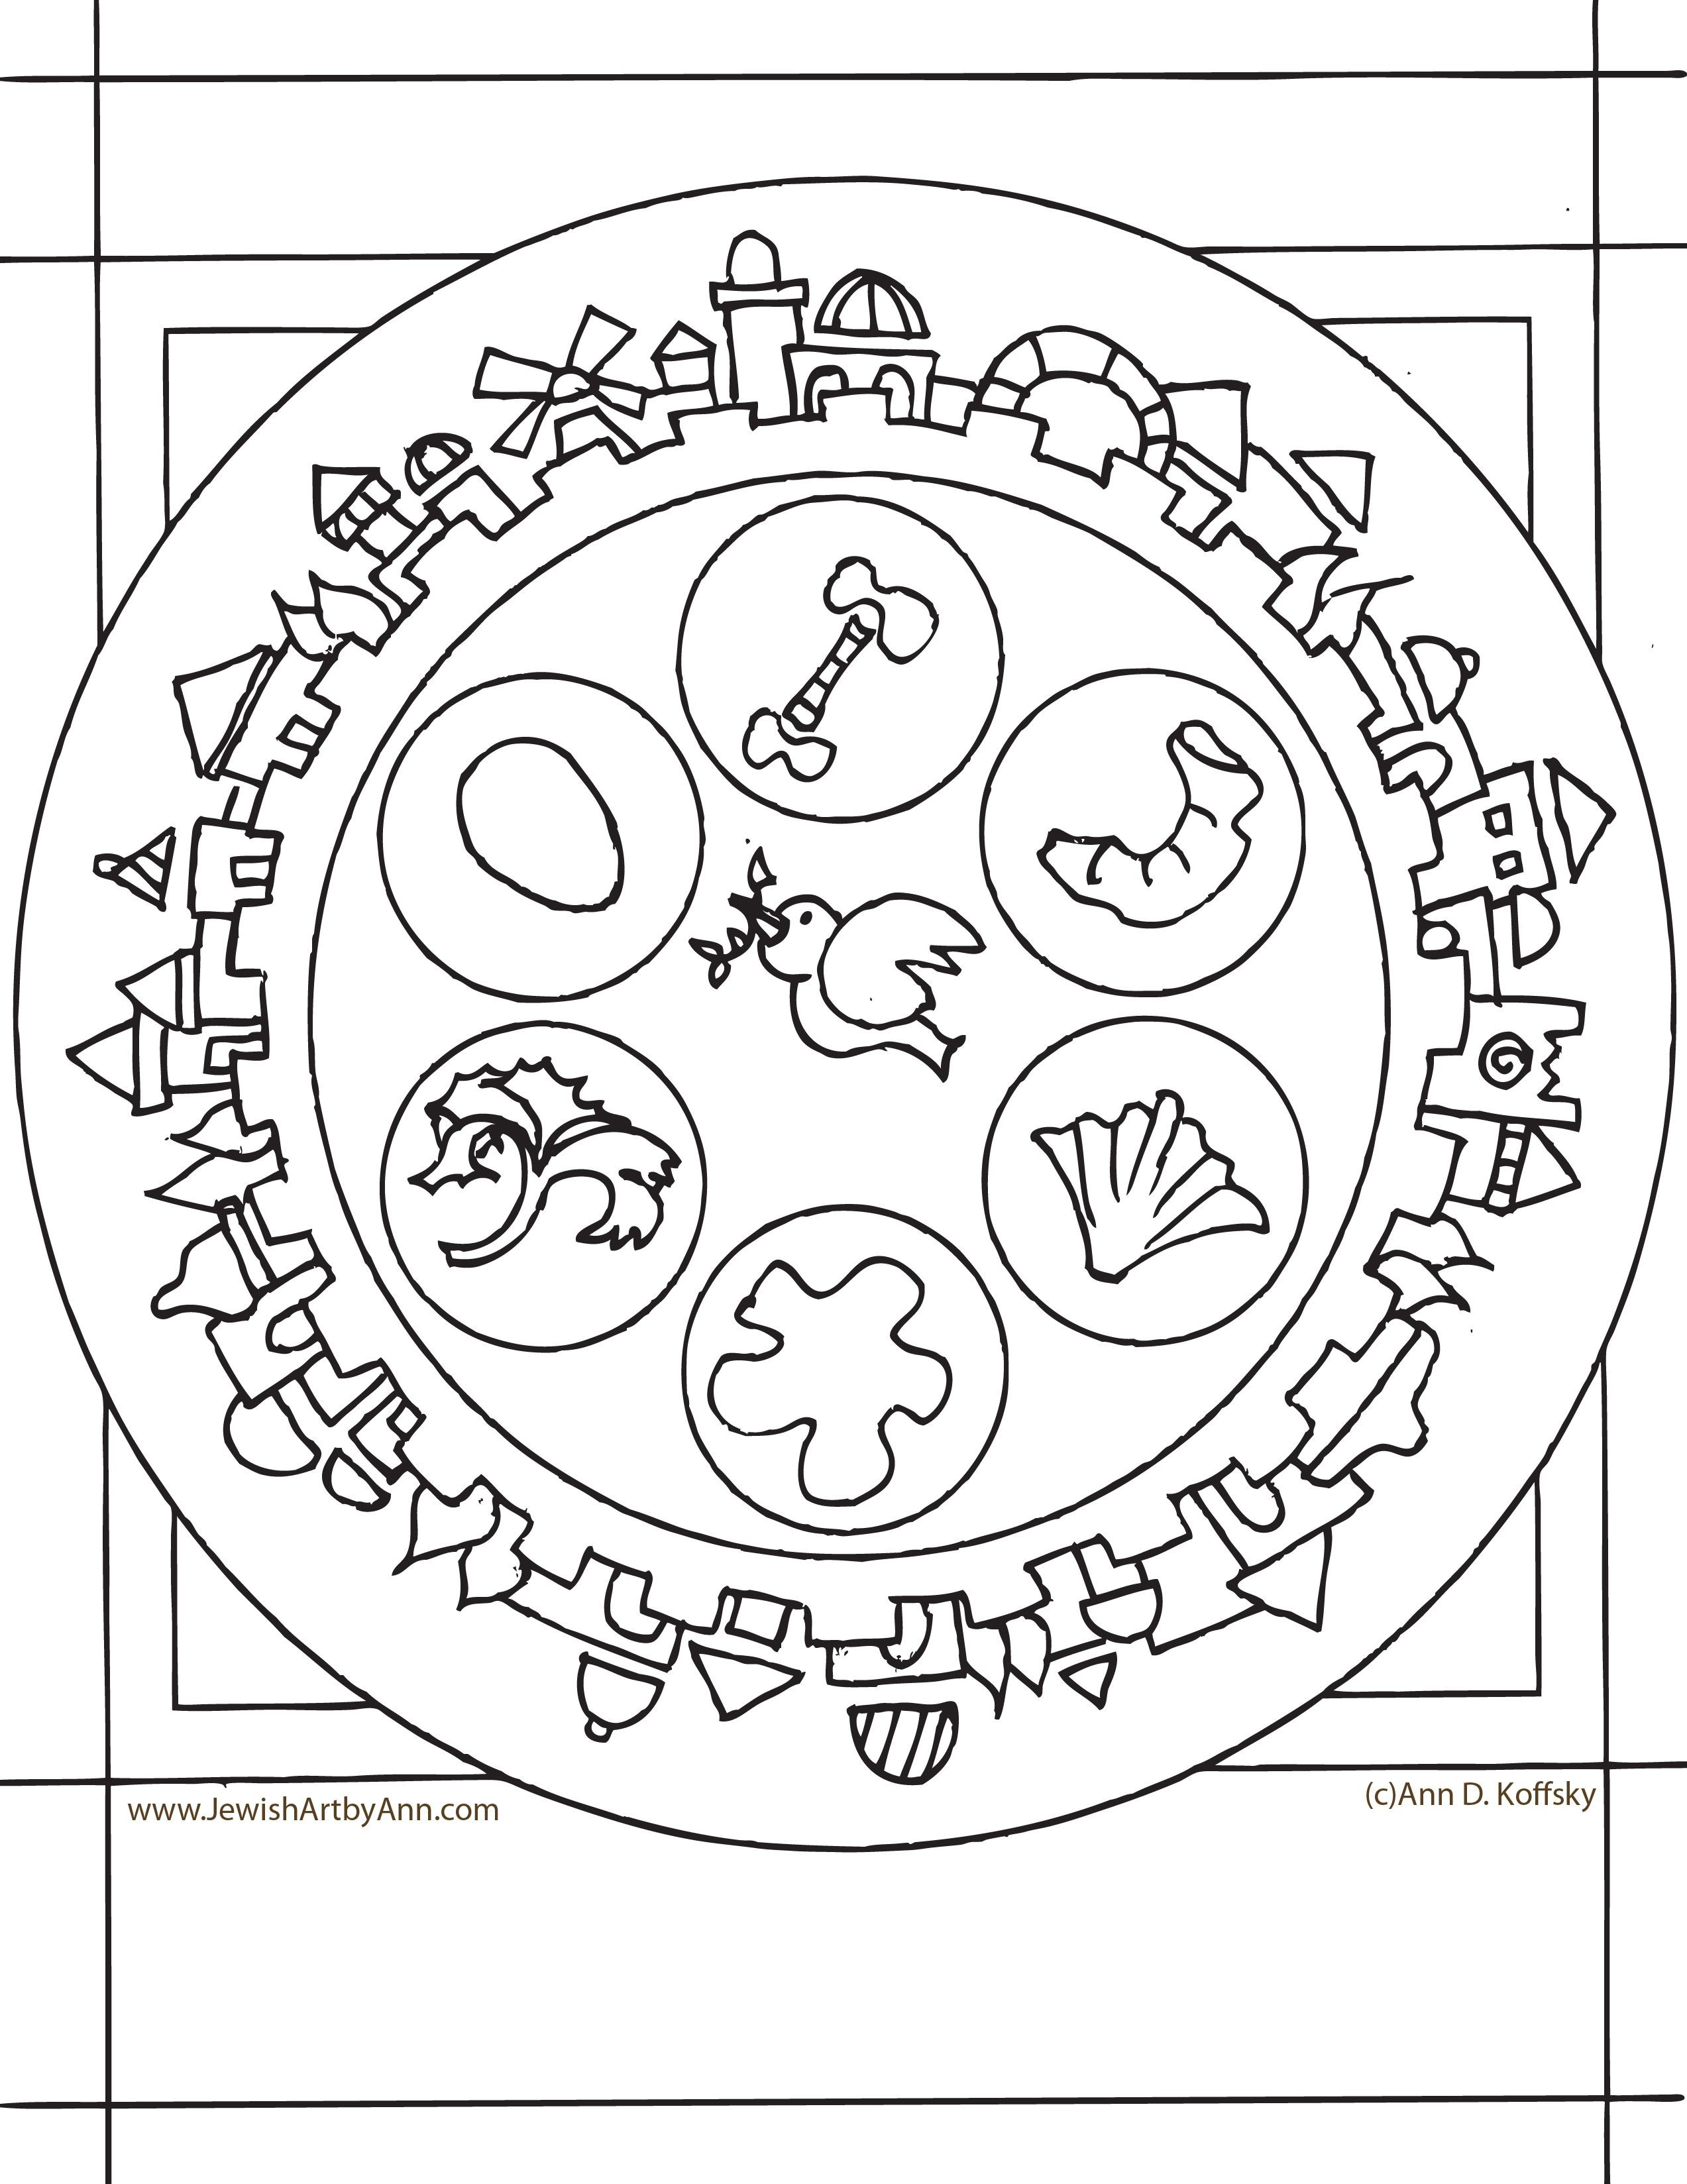 Plate Coloring Page Food Pyramid 2015 Coloring Pages Awesome Ann Koffsky Passover Plate